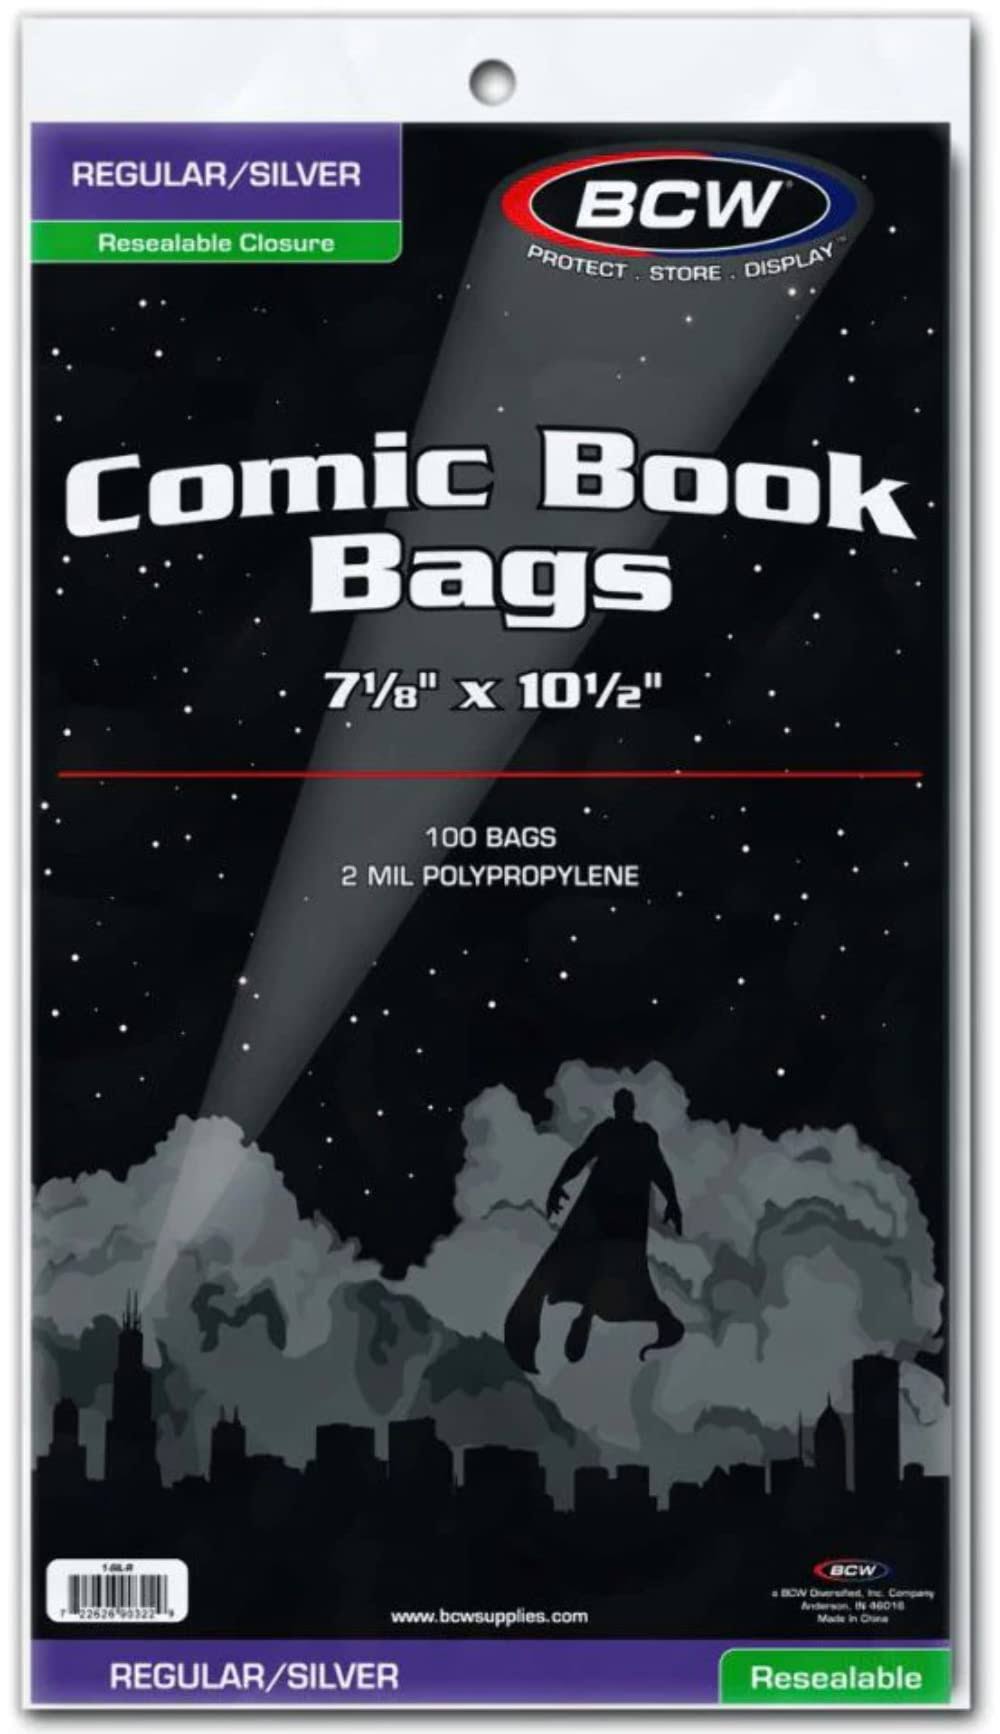 BCW Supplies Resealable Silver Comic Book Bags - 100 ct